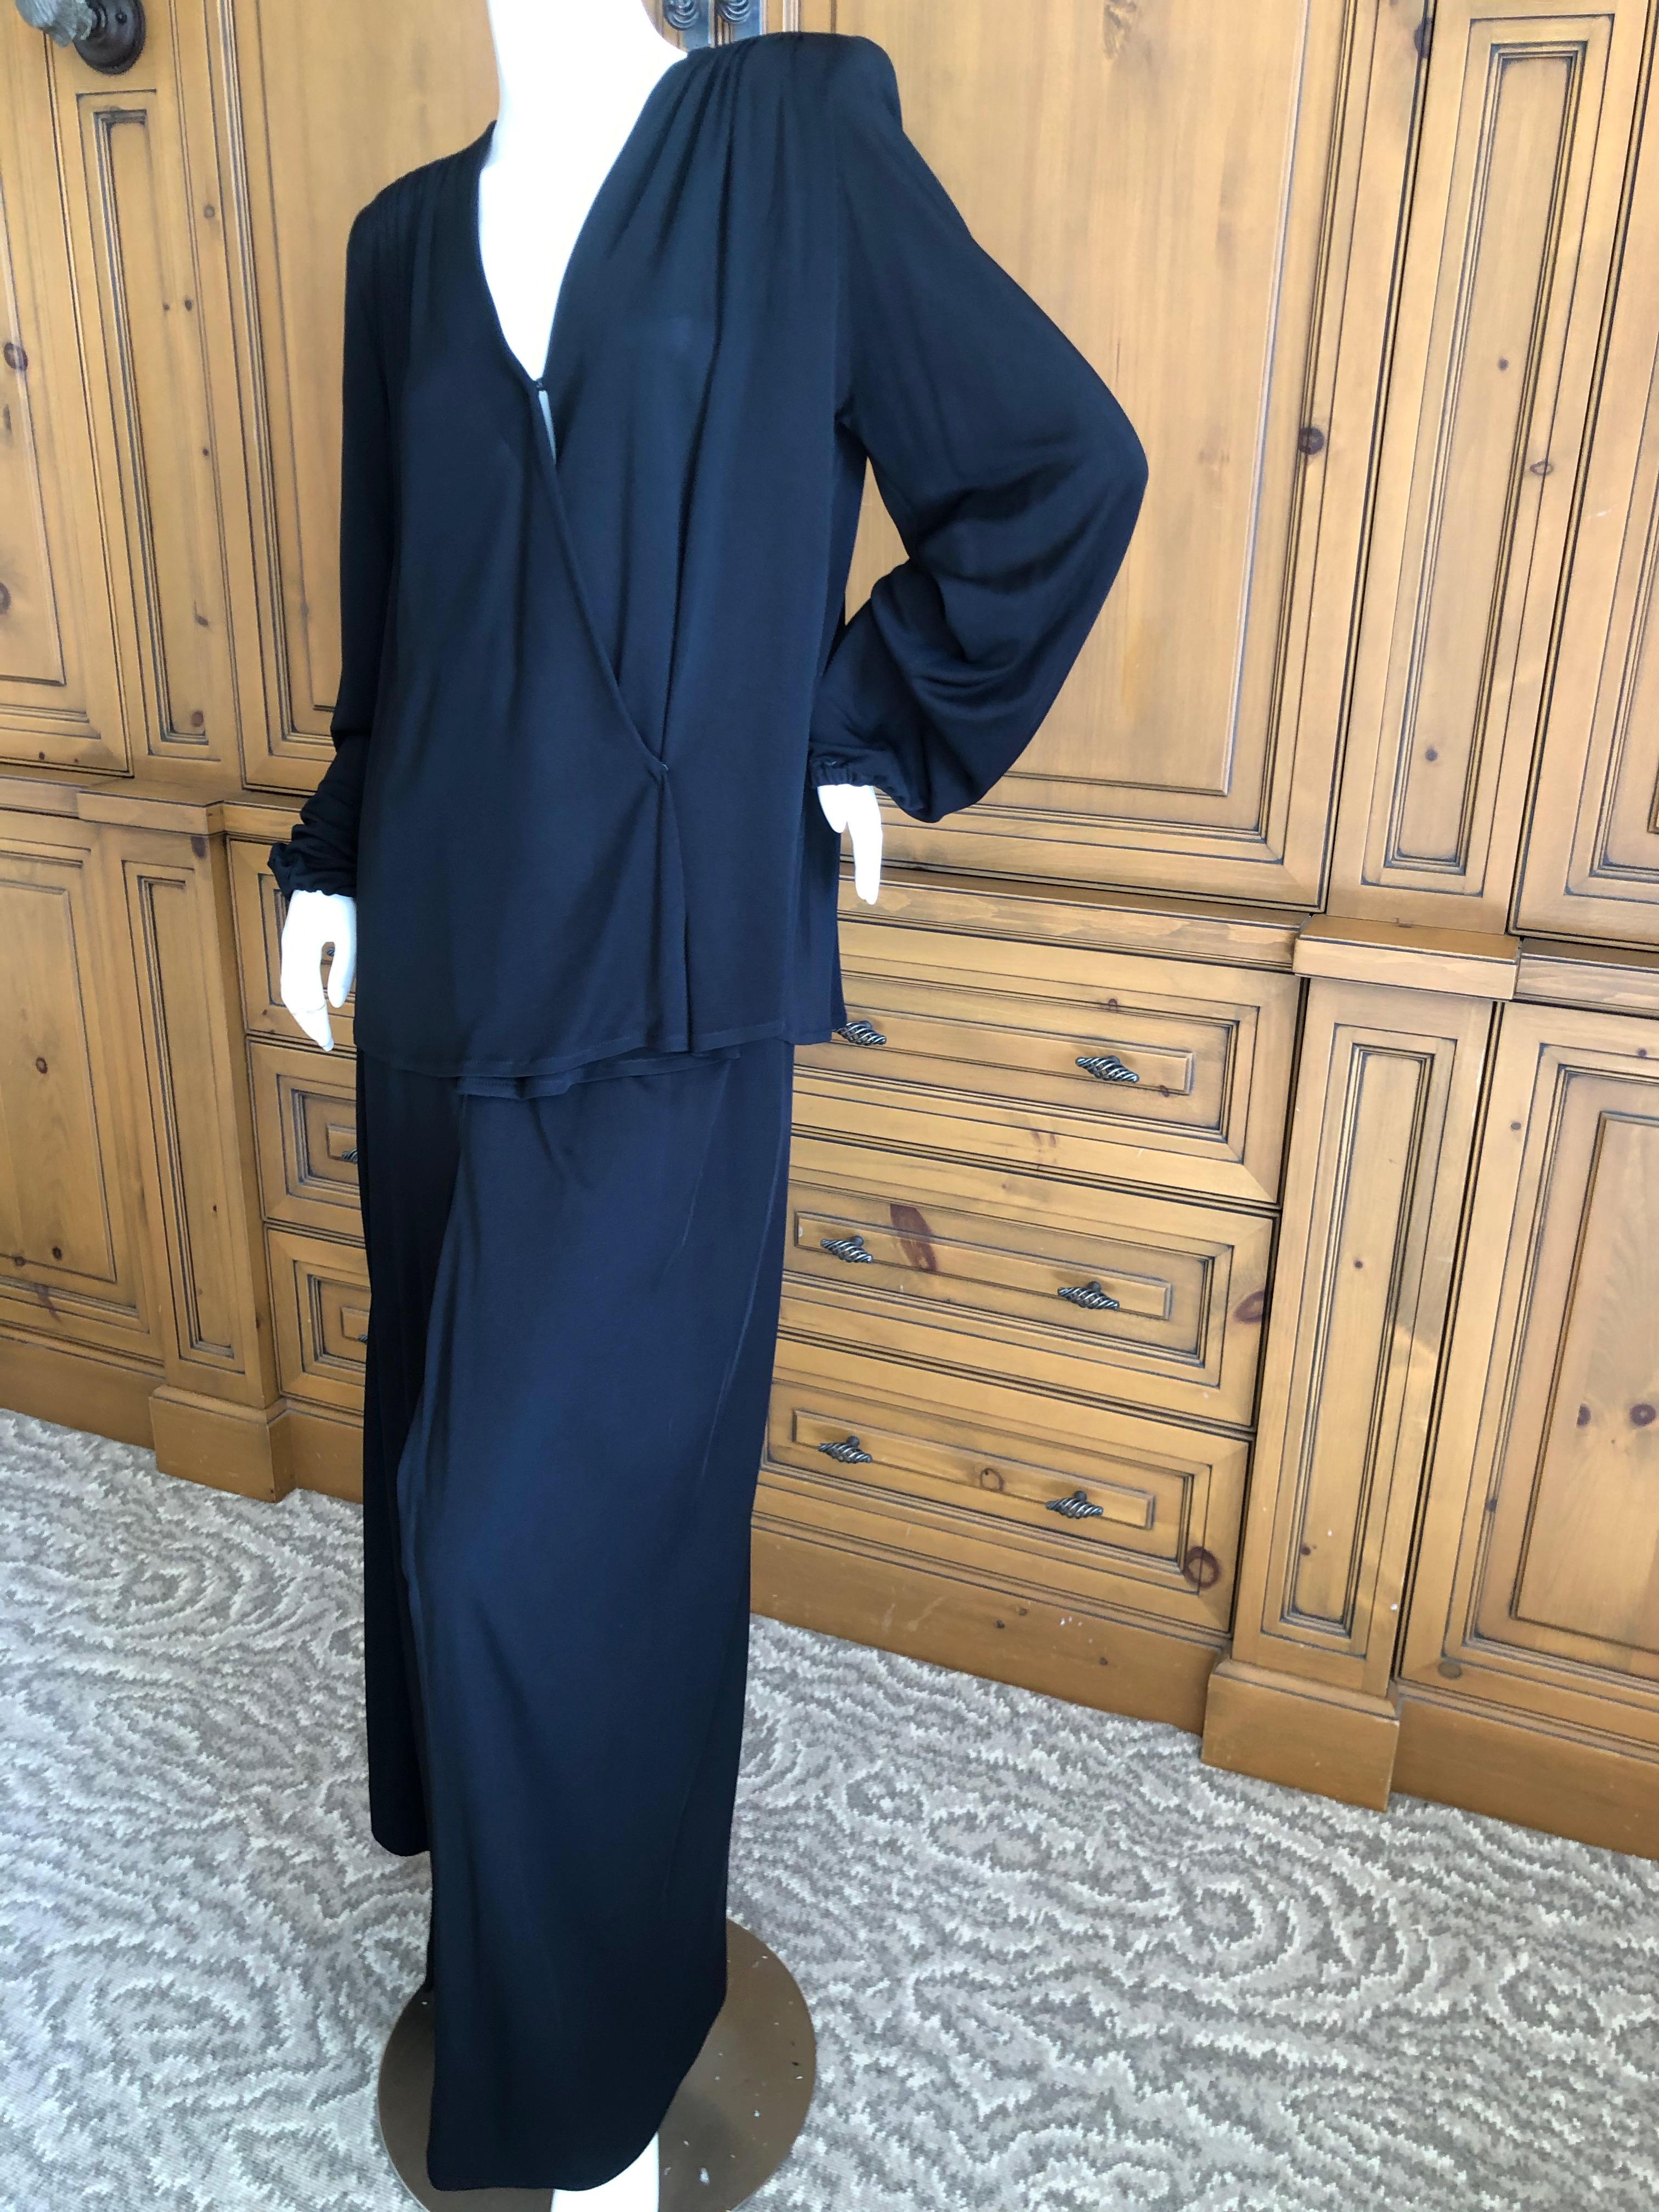 Yves Saint Laurent Rive Gauche 1980's Black Silk Evening Pajama Suit In Excellent Condition For Sale In Cloverdale, CA